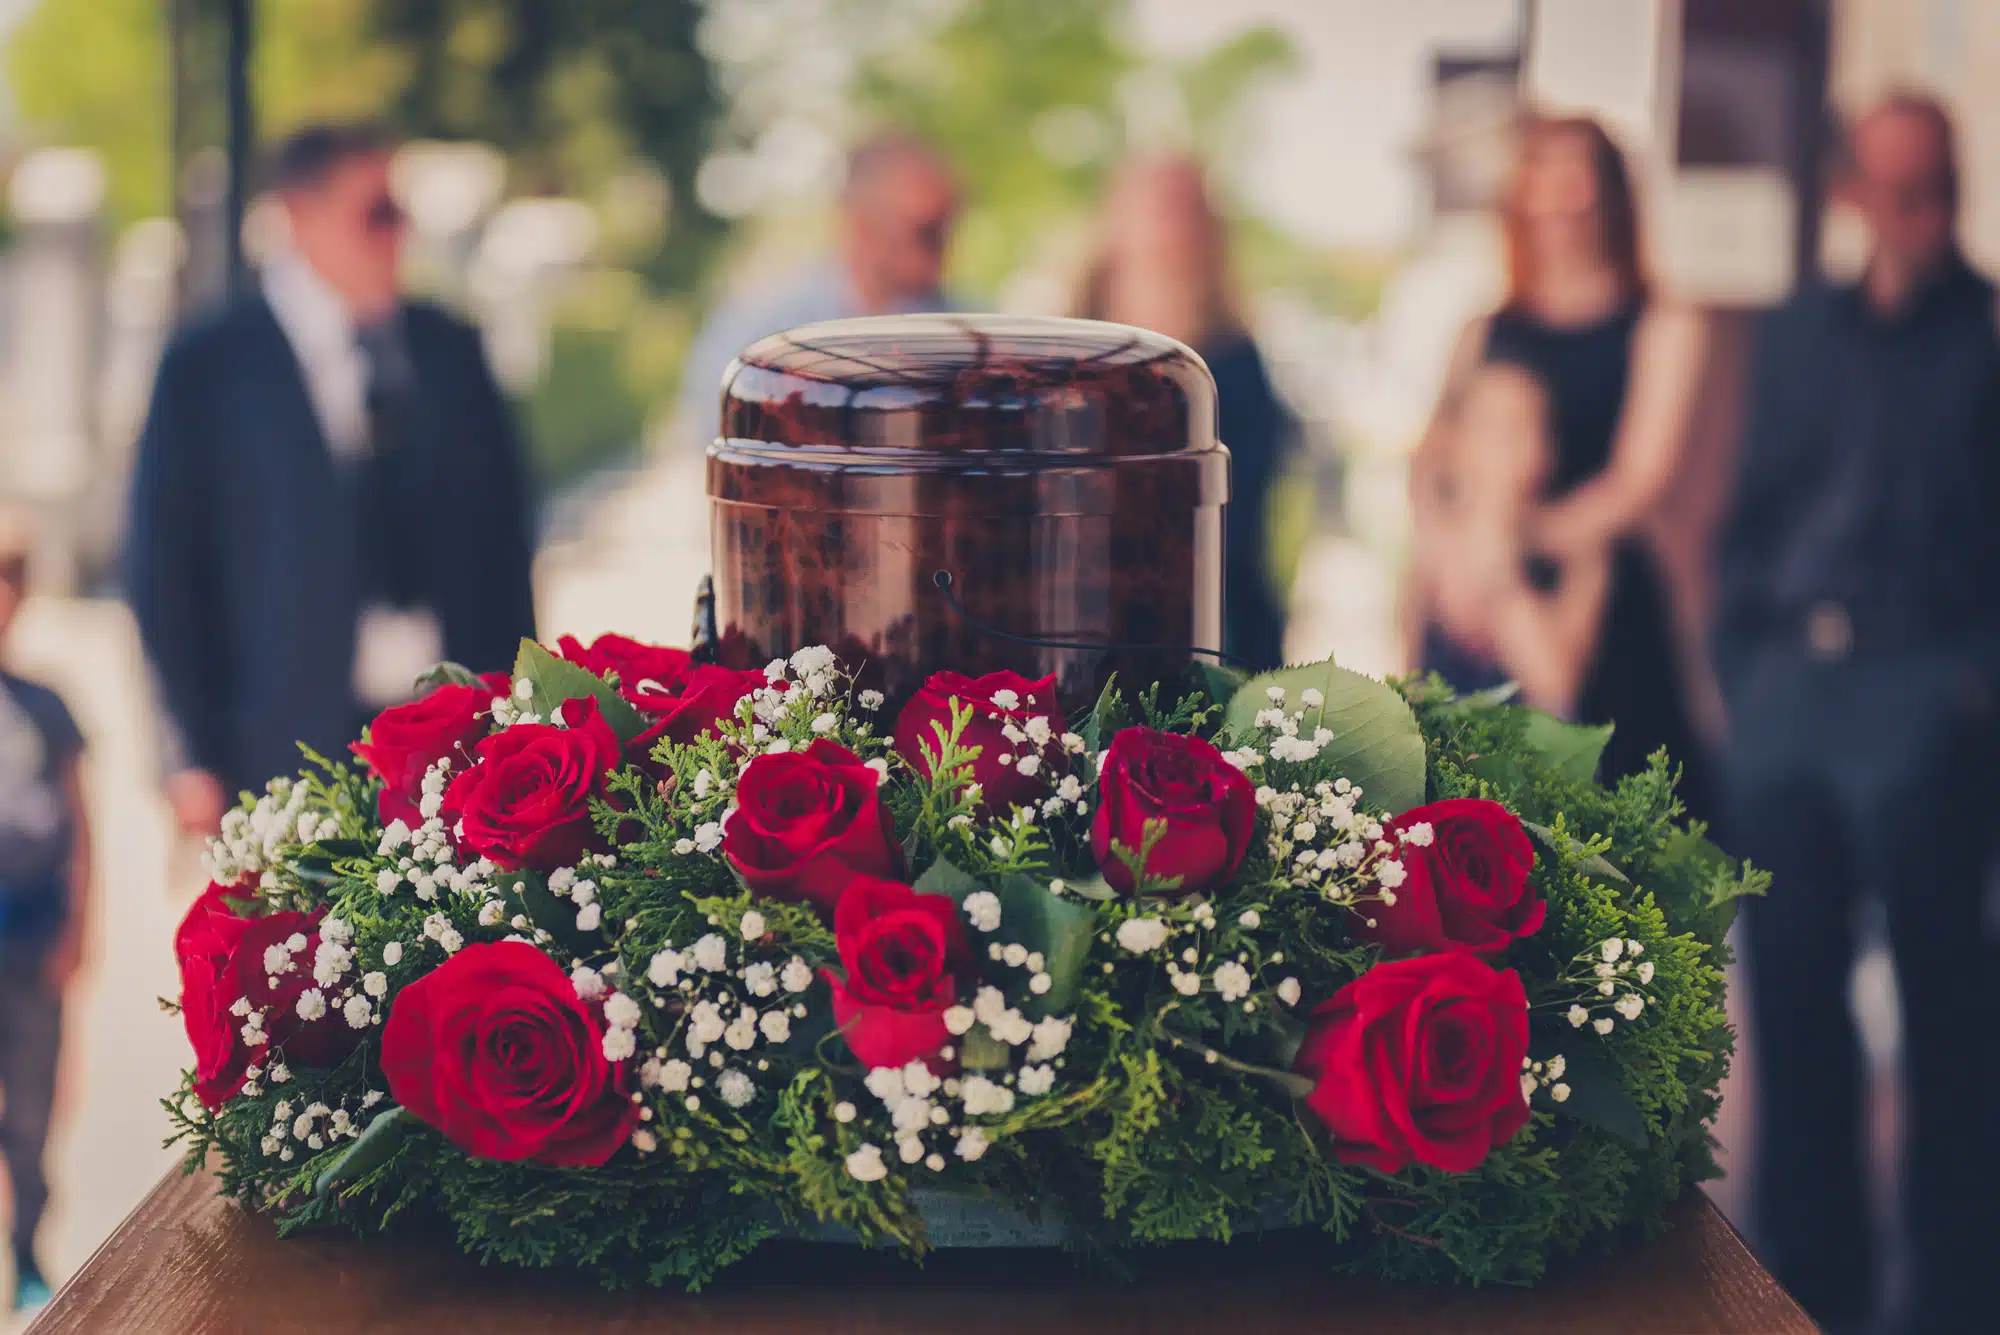 Funeral Feuds How to approach a difficult funeral